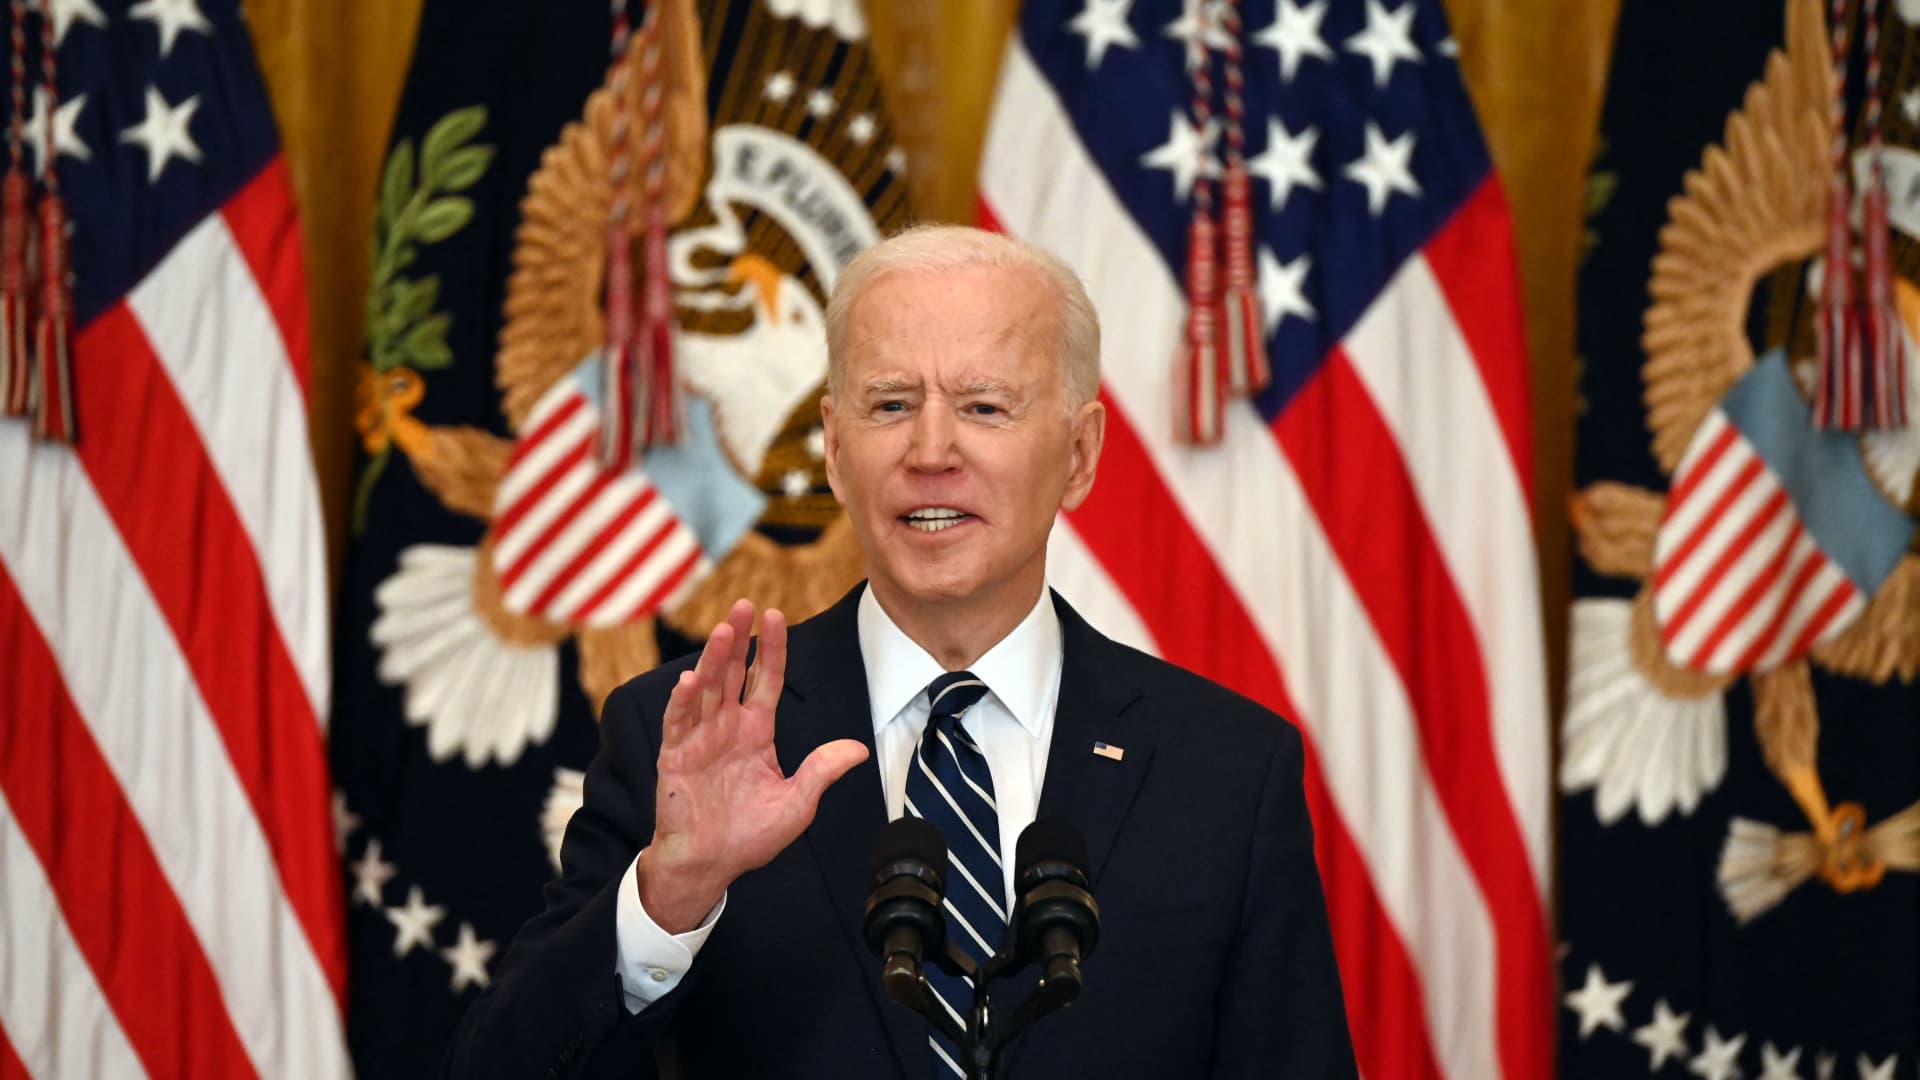 North Korea could launch a missile or nuclear test to ‘overshadow’ Biden’s first Asia trip